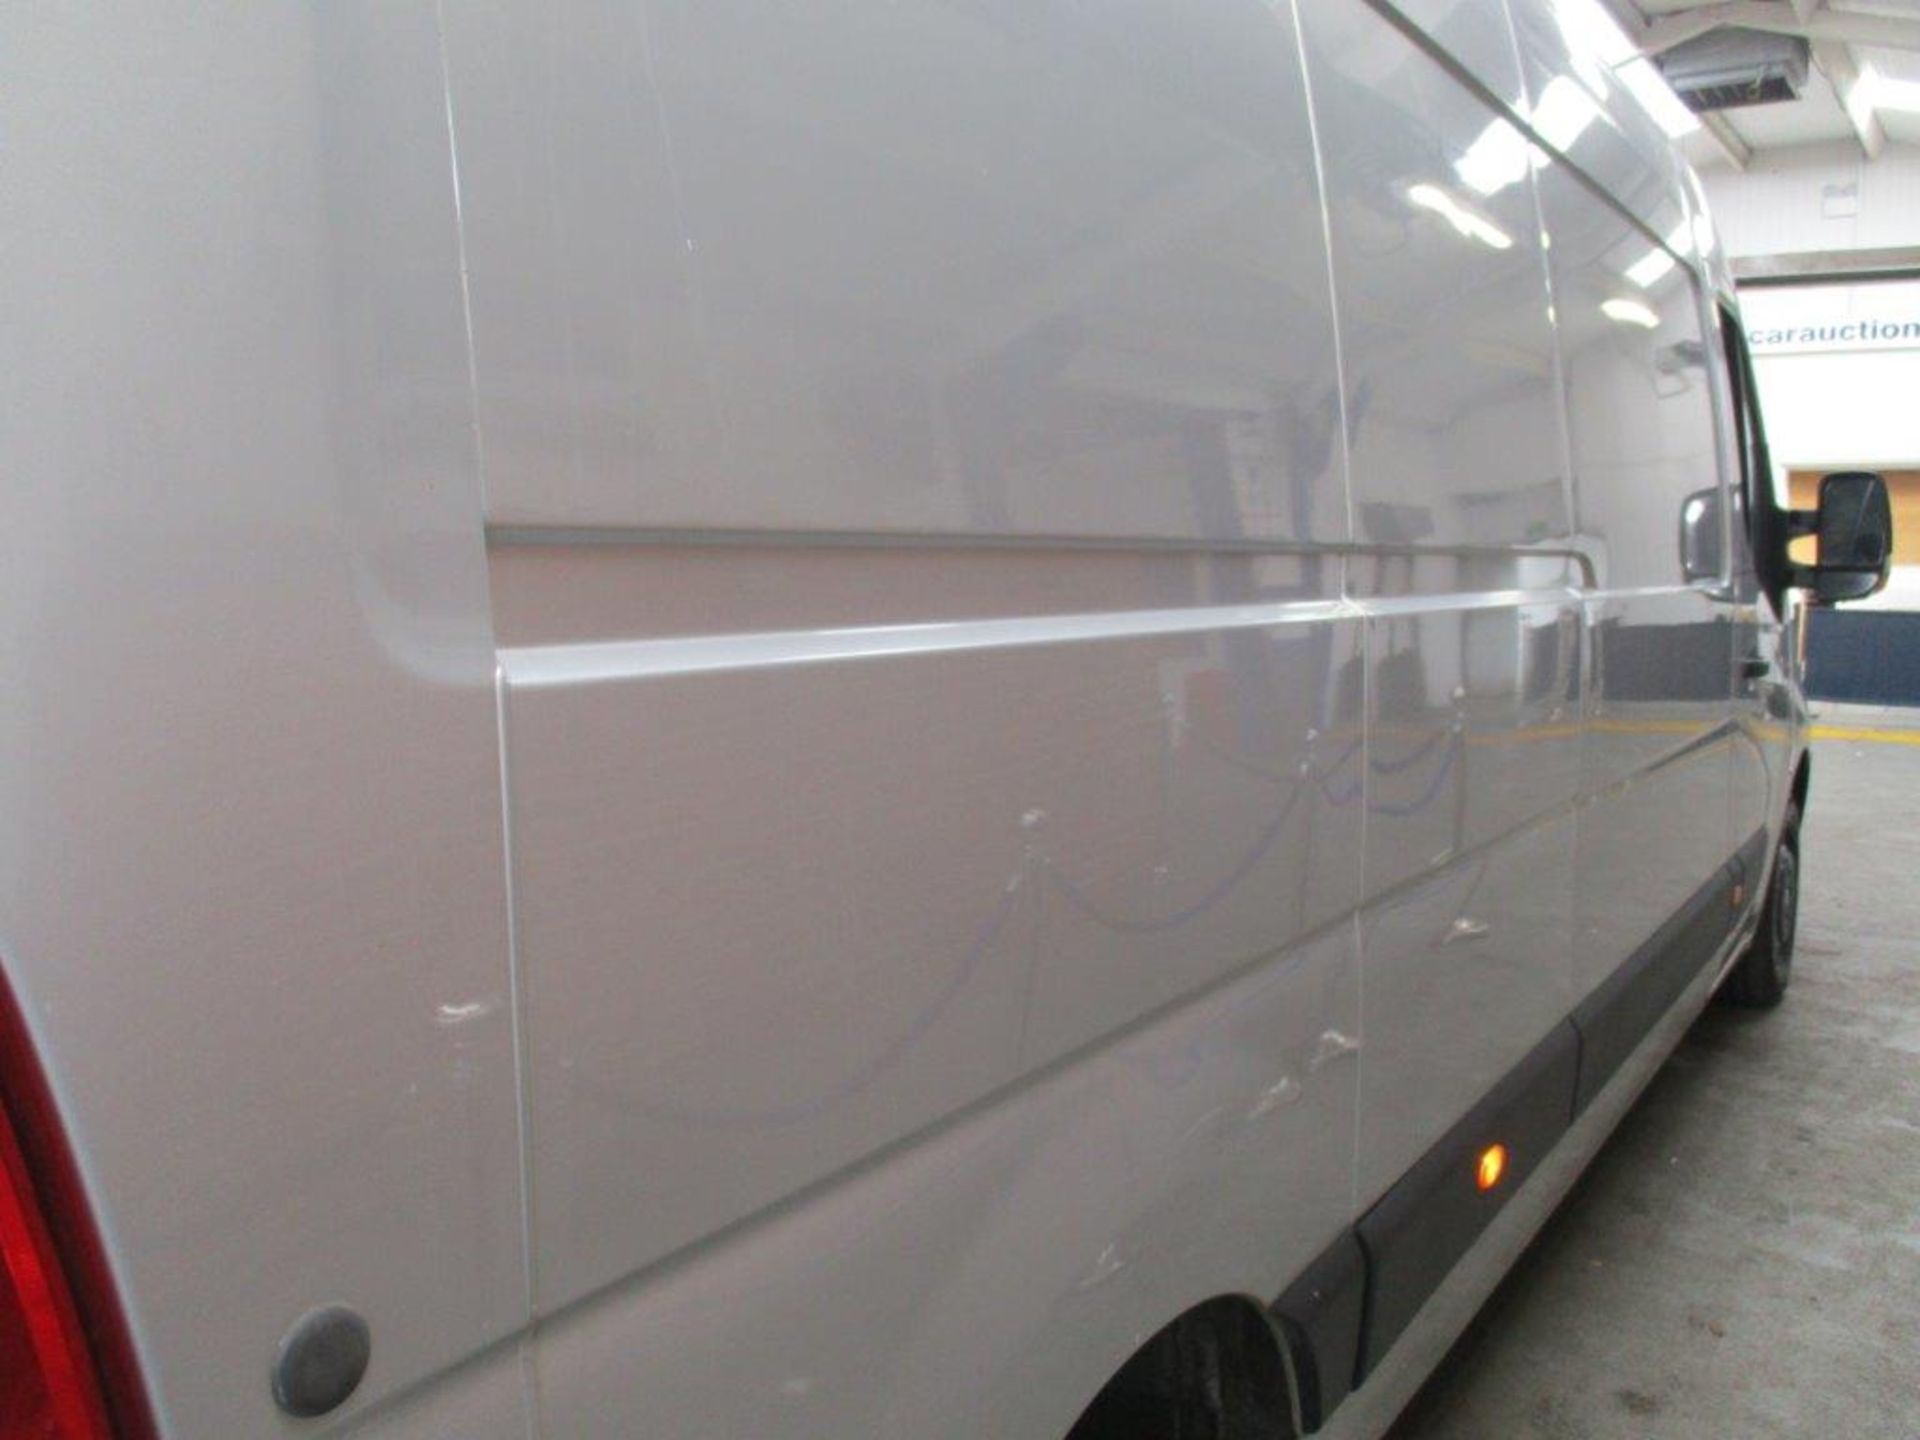 13 13 Renault Master LM35 DCI 125 - Image 18 of 28